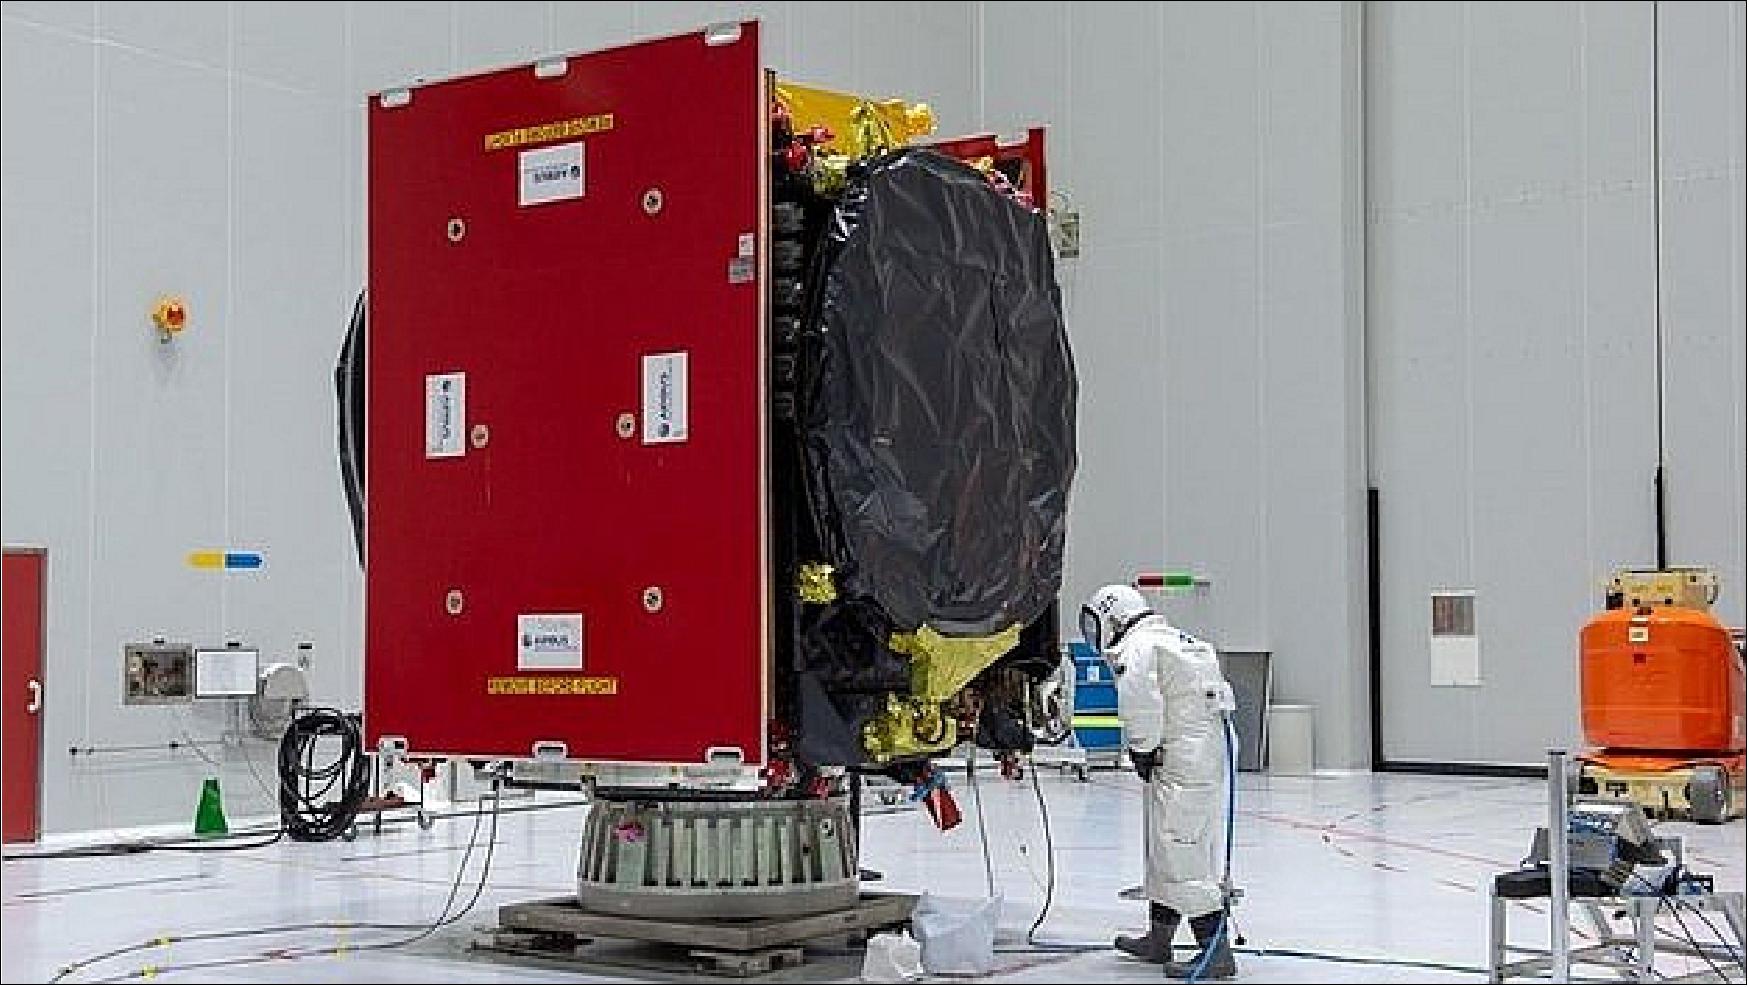 Figure 3: The EDRS-C satellite has been fuelled ahead of its launch (image credit: ESA)